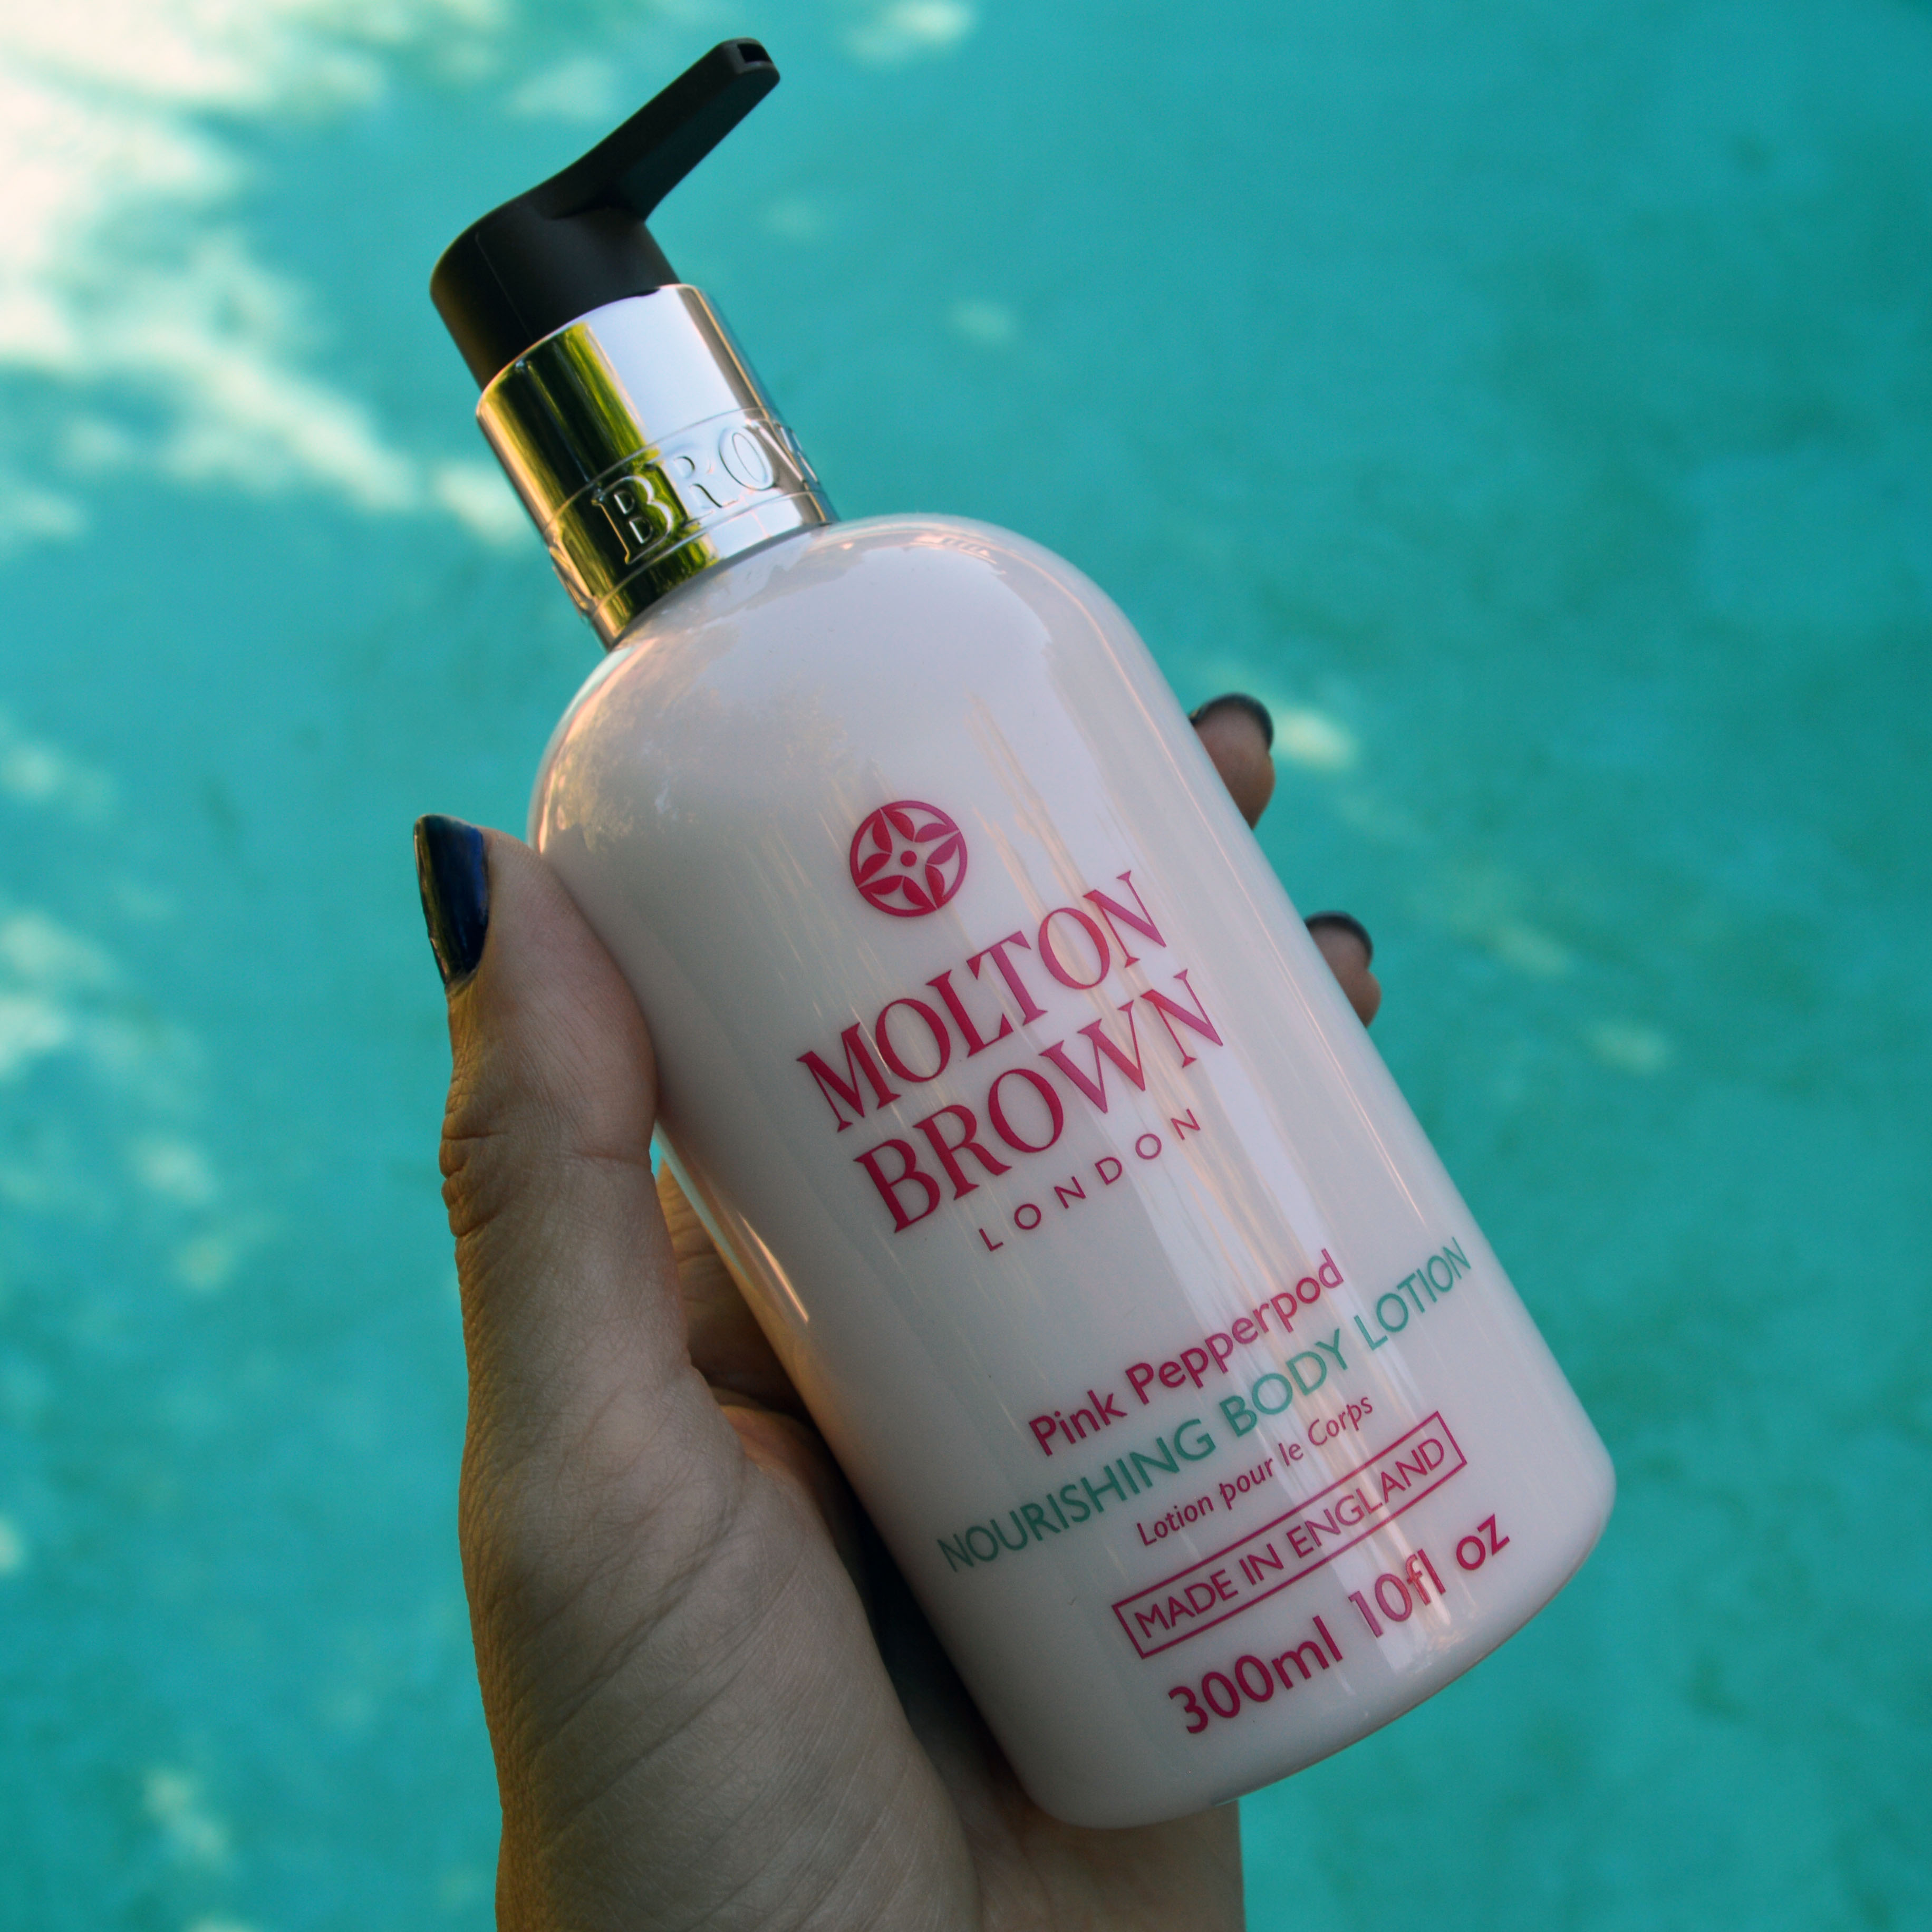 Molton Brown Pink Pepperpod body lotion review – Area Fashionista